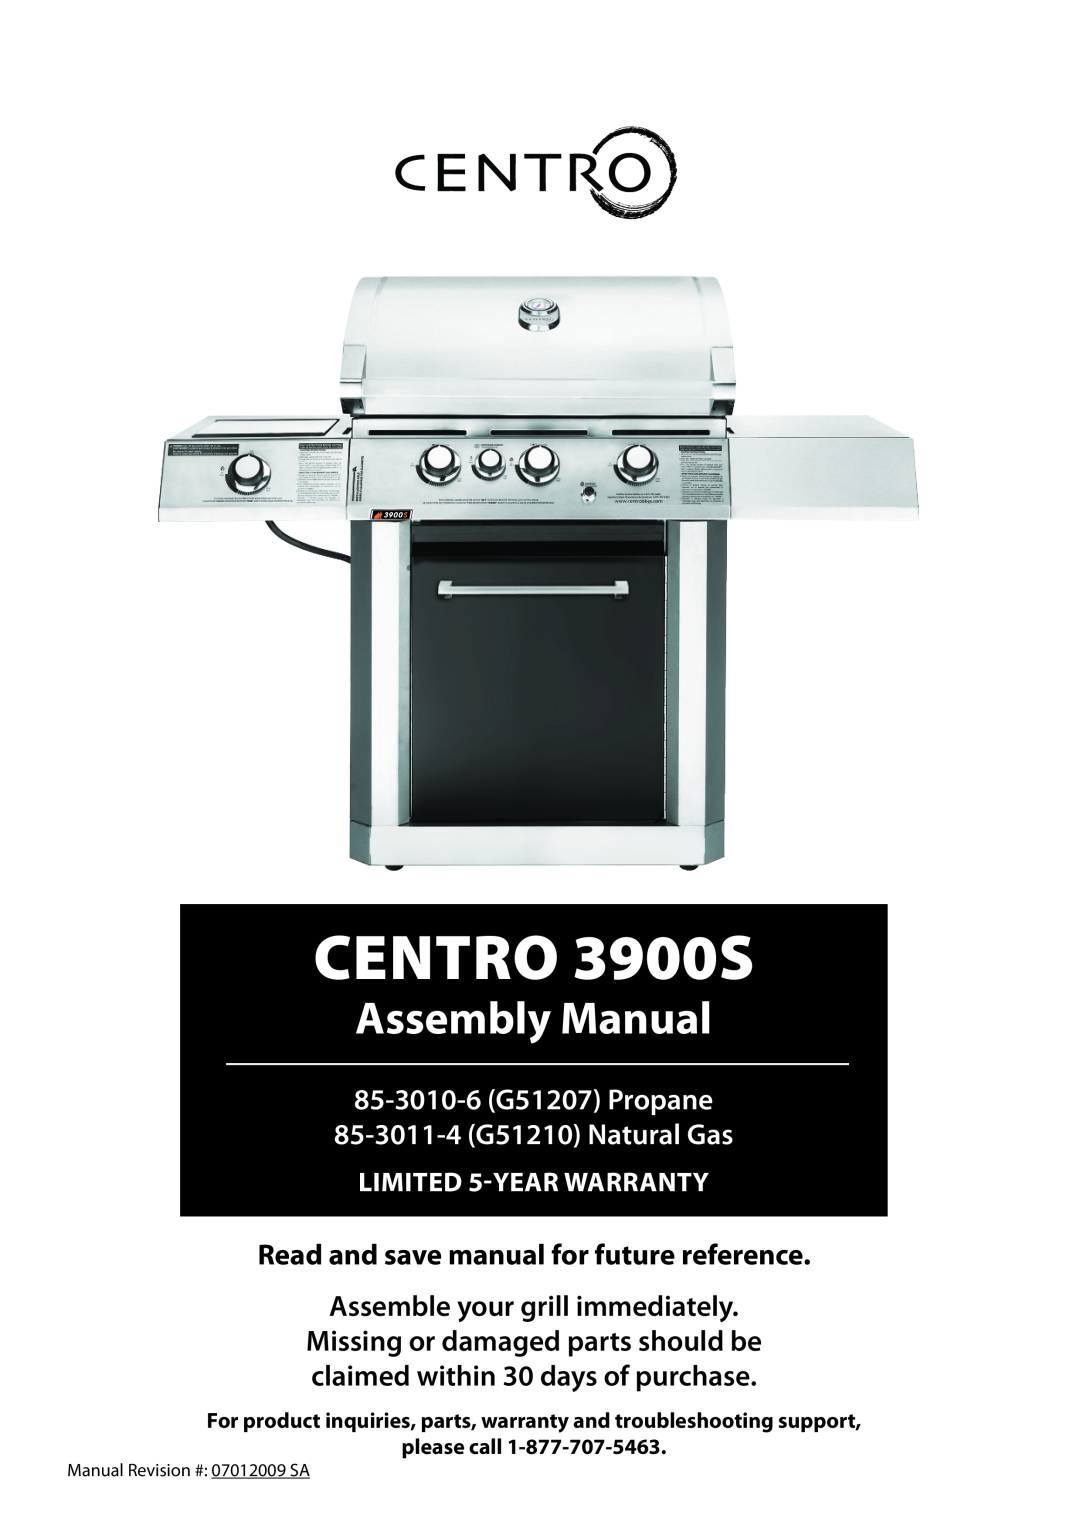 Centro 3900S warranty 85-3010-6 G51207 Propane 85-3011-4 G51210 Natural Gas, Read and save manual for future reference 